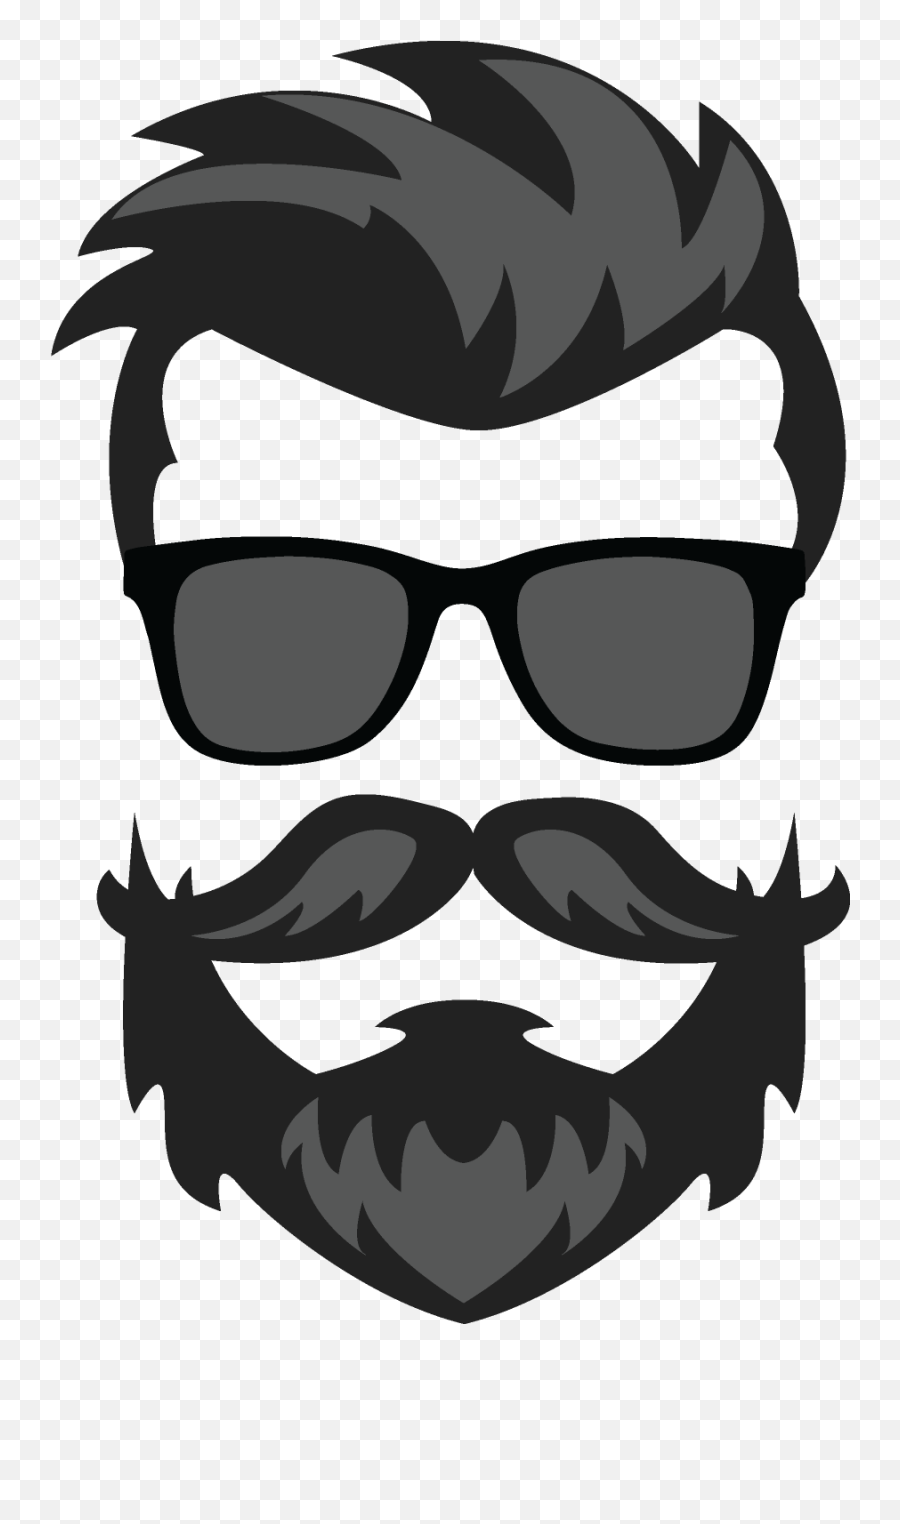 My New Avatar Proposal - Illustration Png,White Beard Png